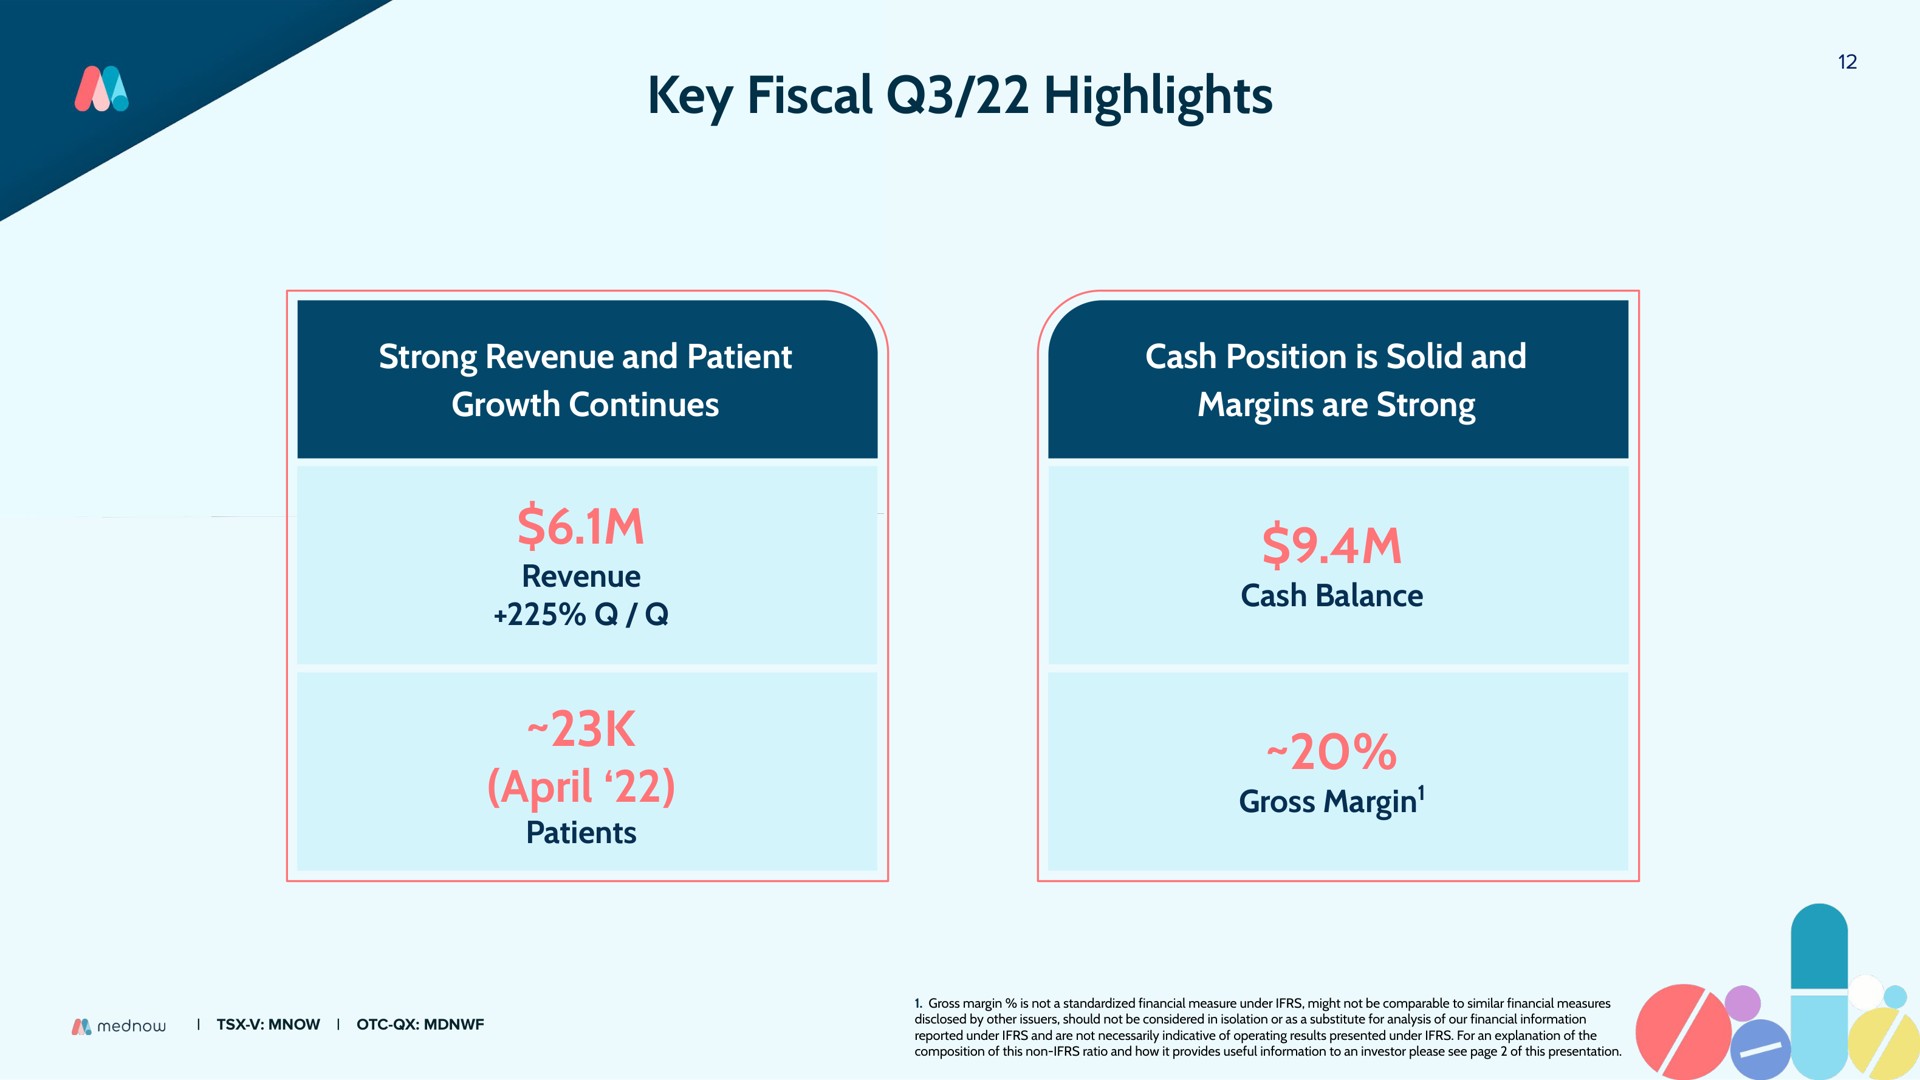 key fiscal highlights | Mednow